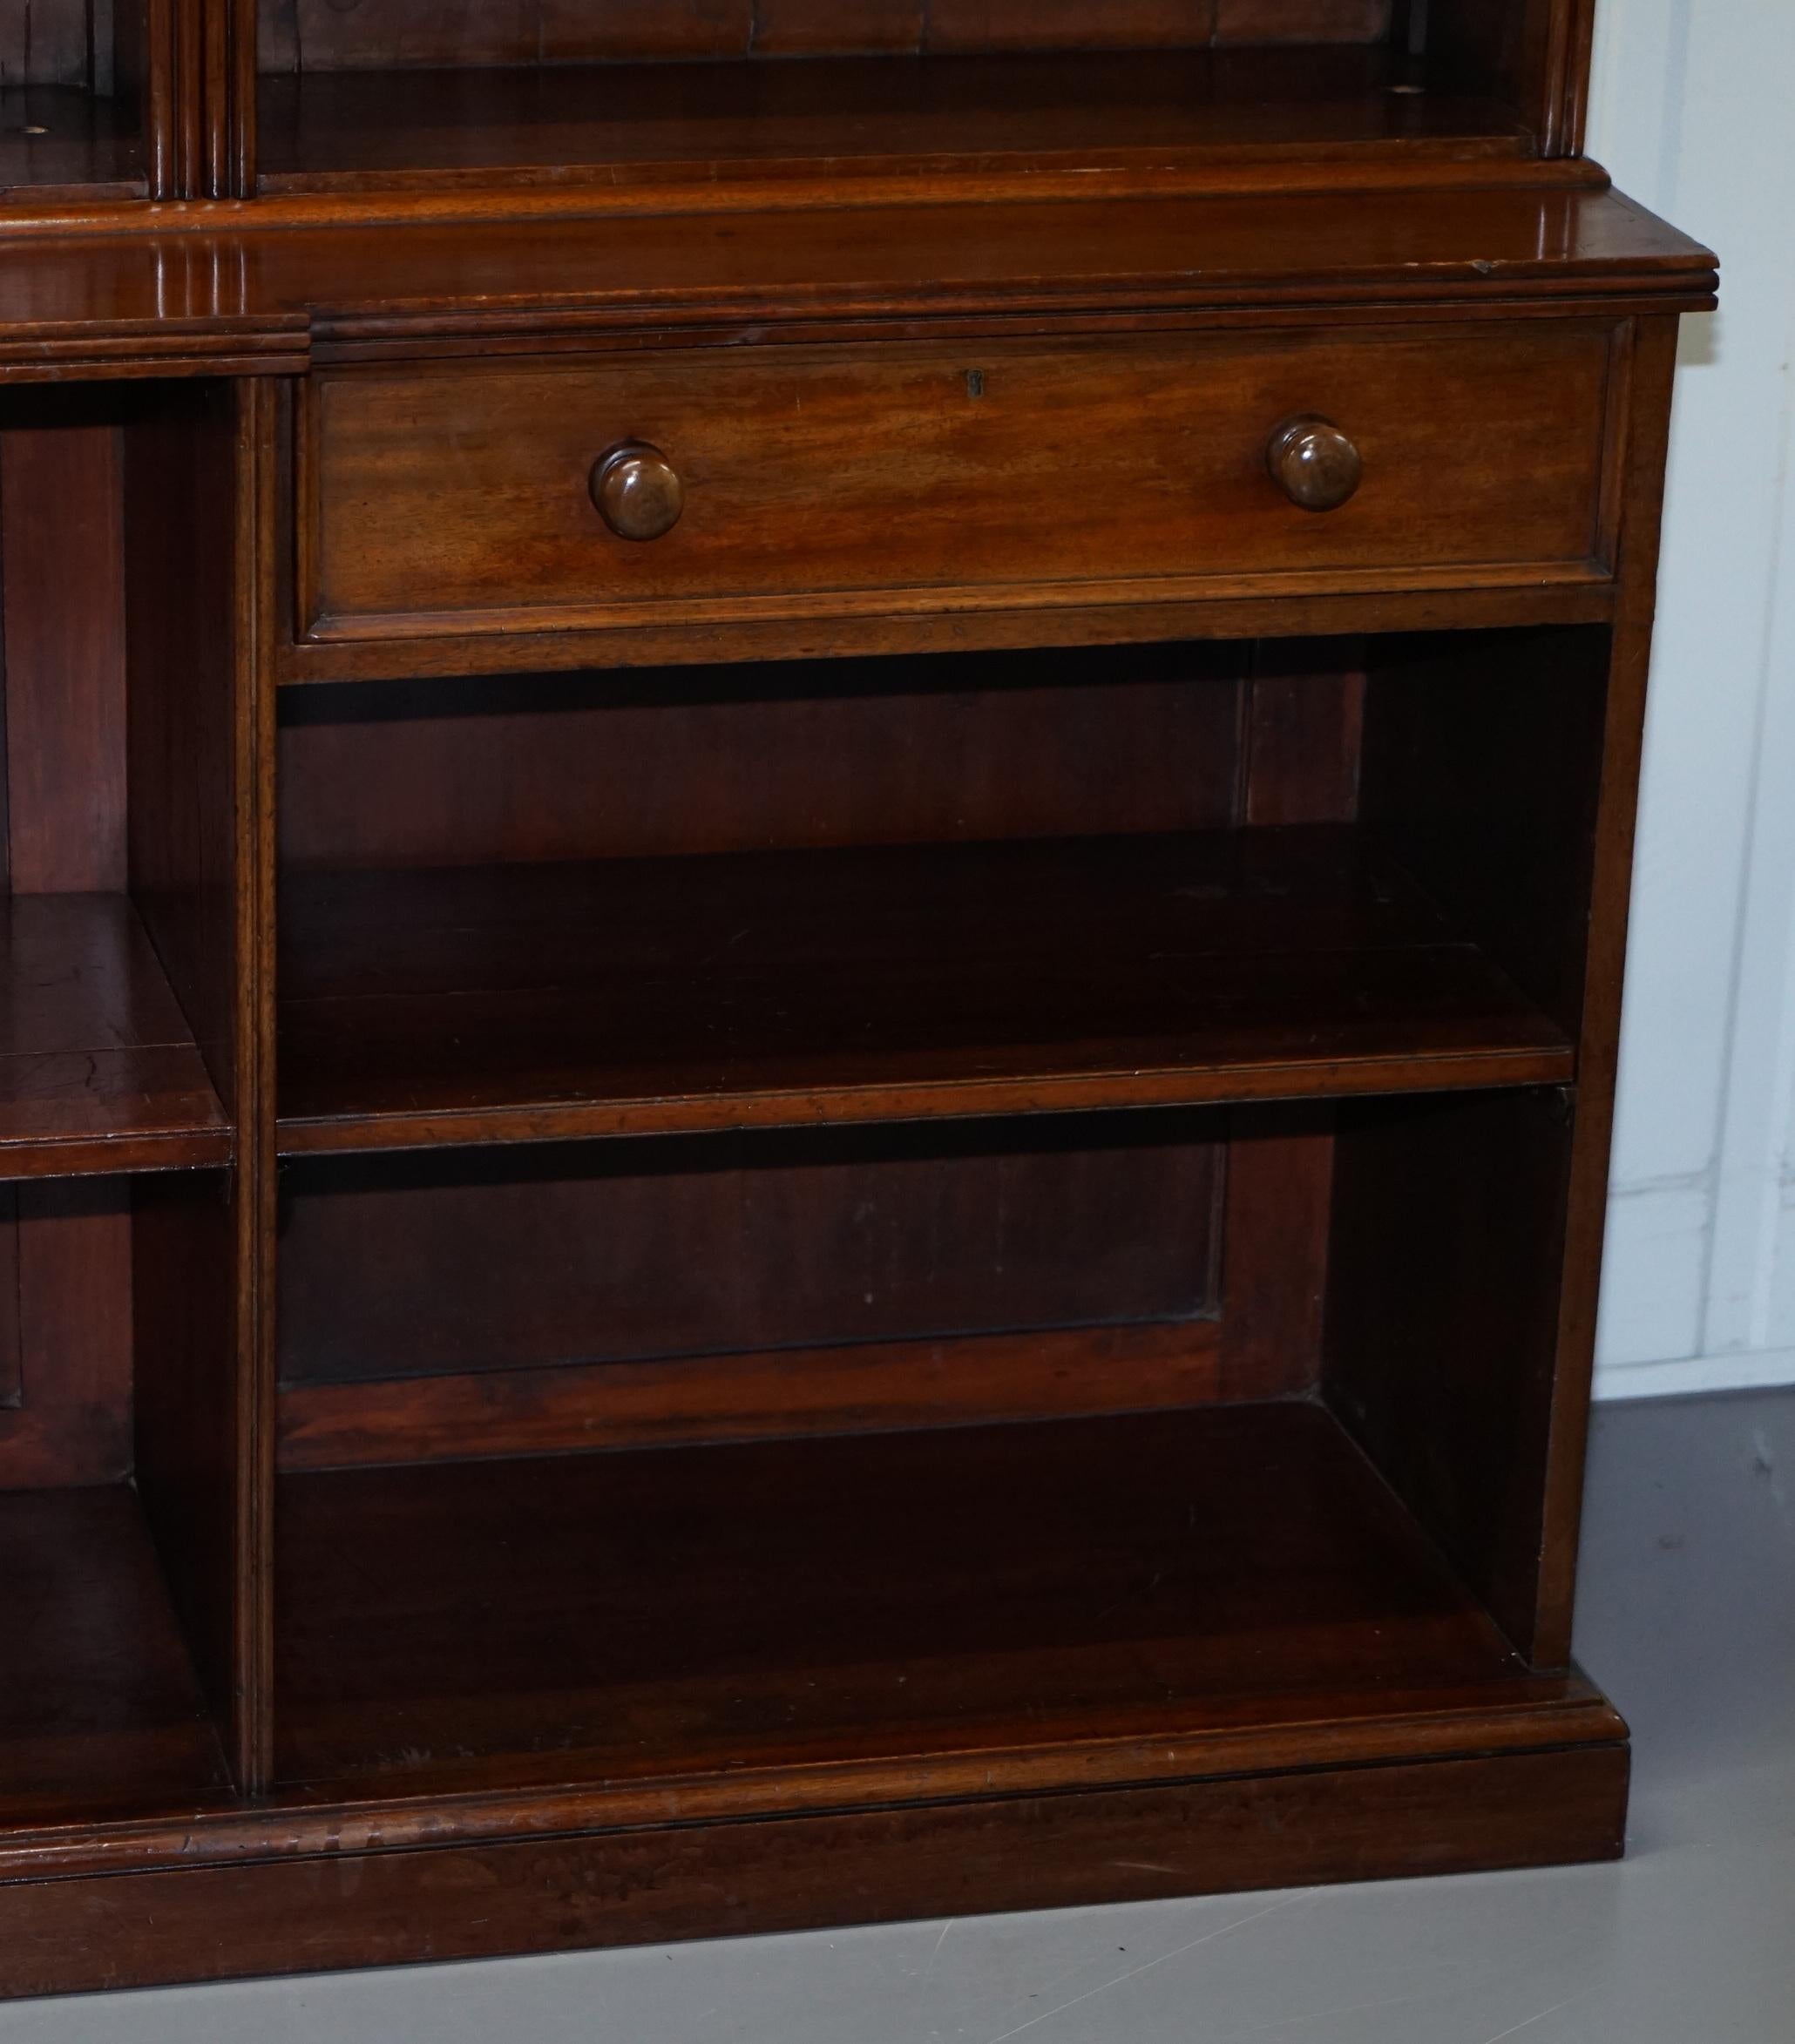 Hand-Crafted Stunning Very Large Tall Victorian Mahogany Library Breakfront Bookcase